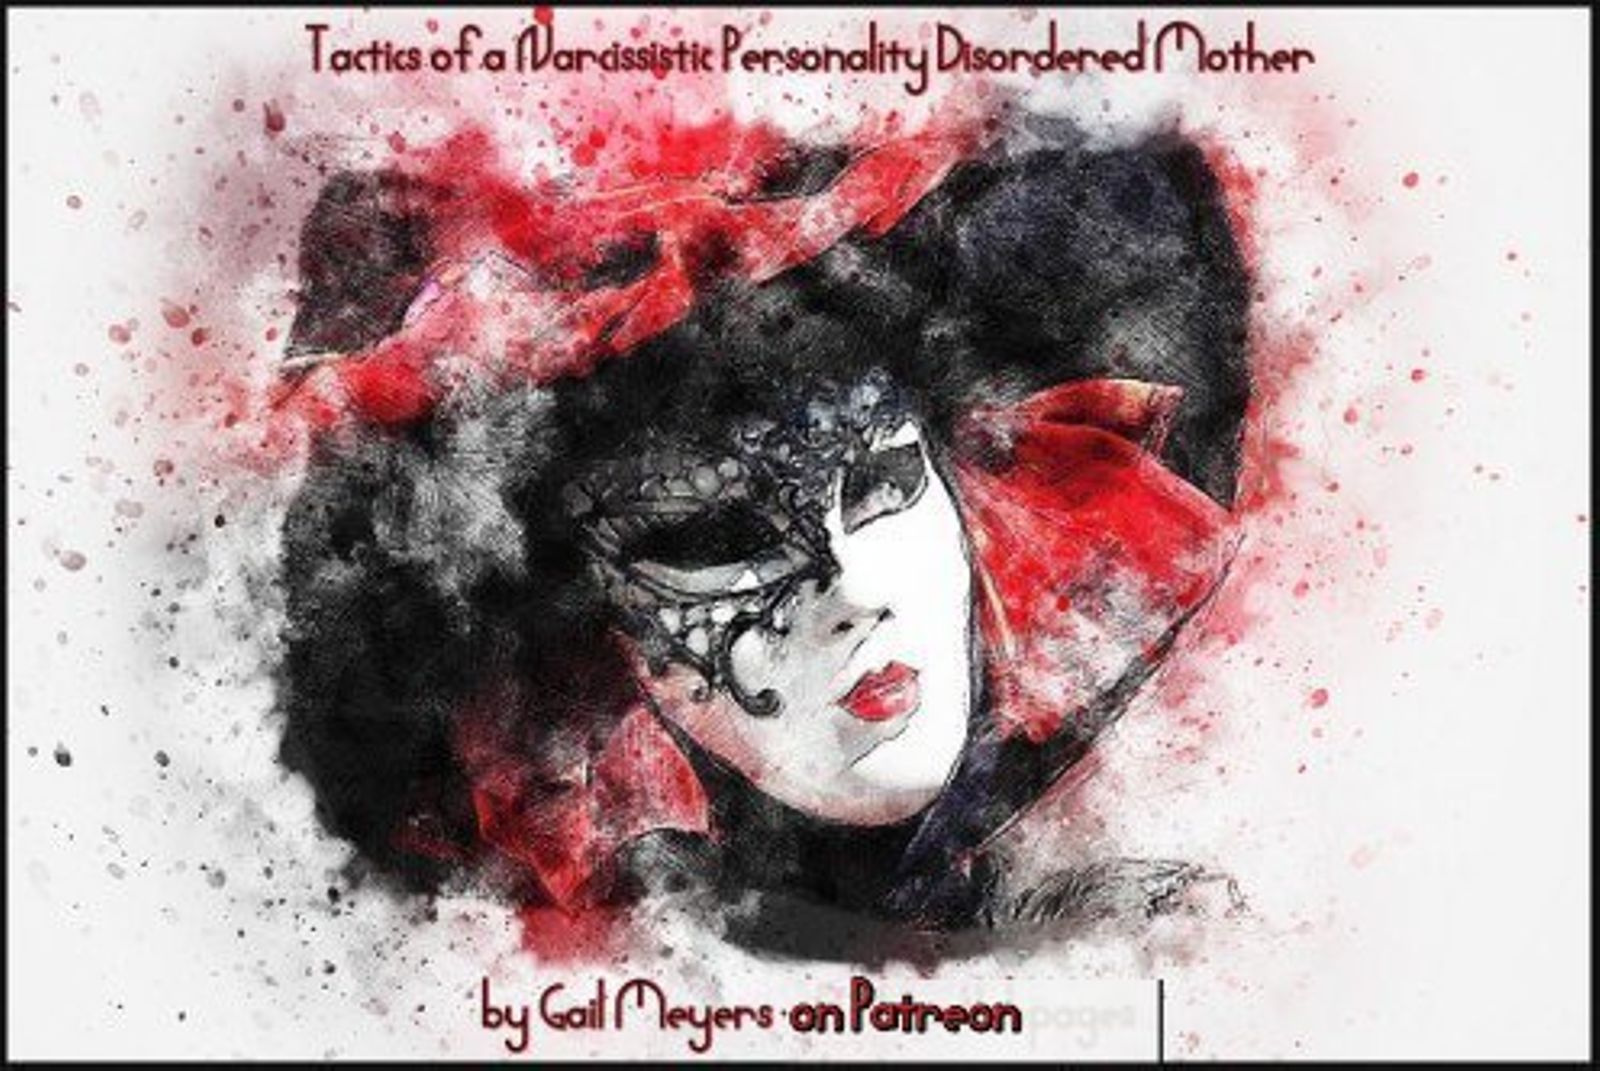 Tactics of a Narcissistic Personality Disordered Mother by Gail Meyers on Patreon